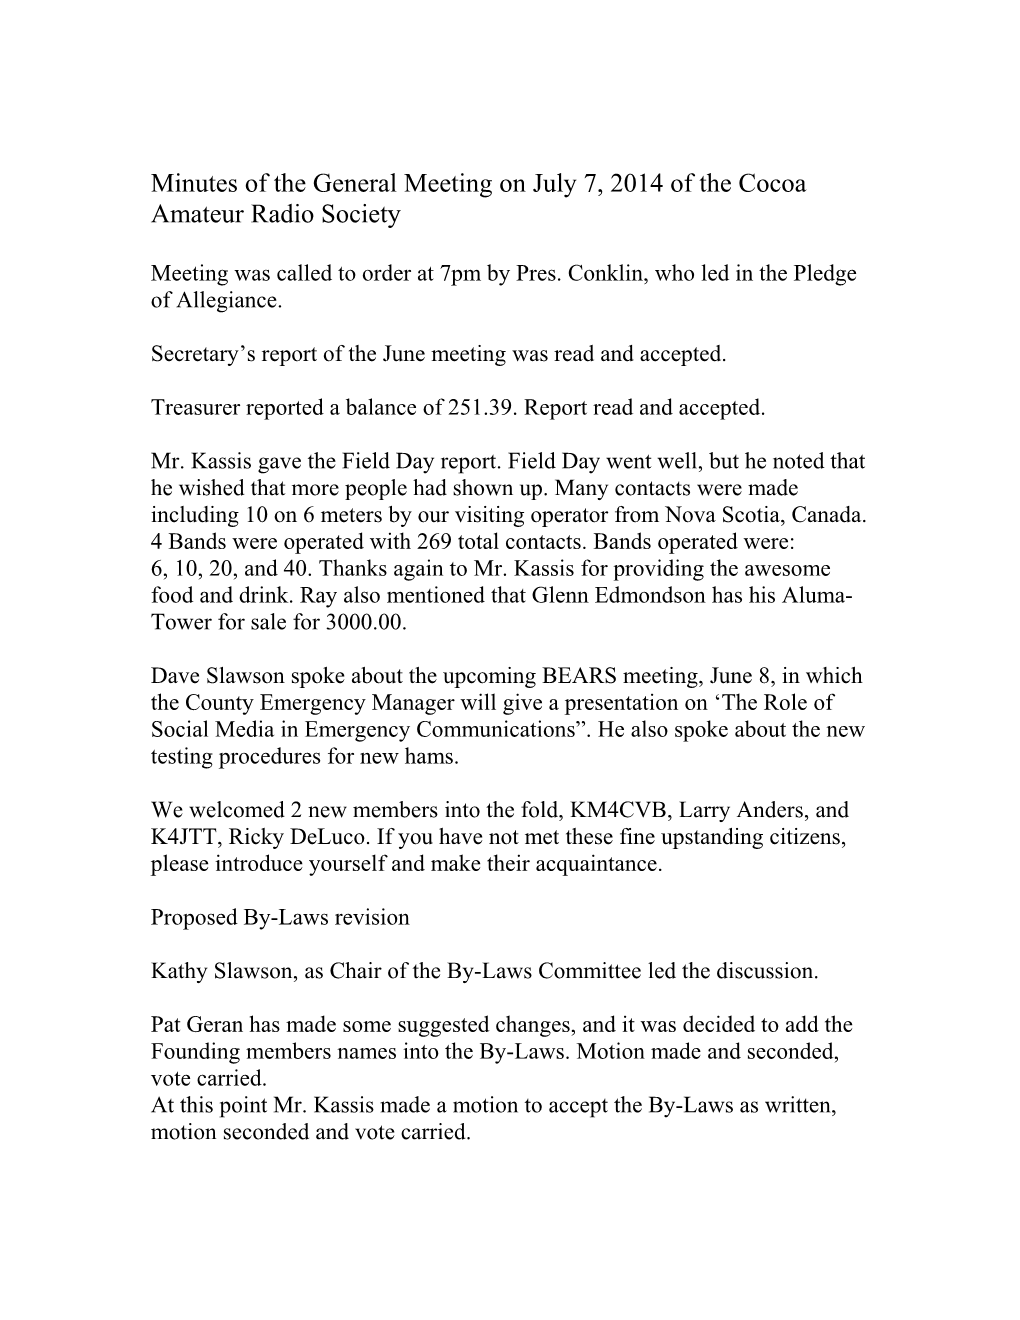 Minutes of the General Meeting on July 7, 2014 of the Cocoa Amateur Radio Society